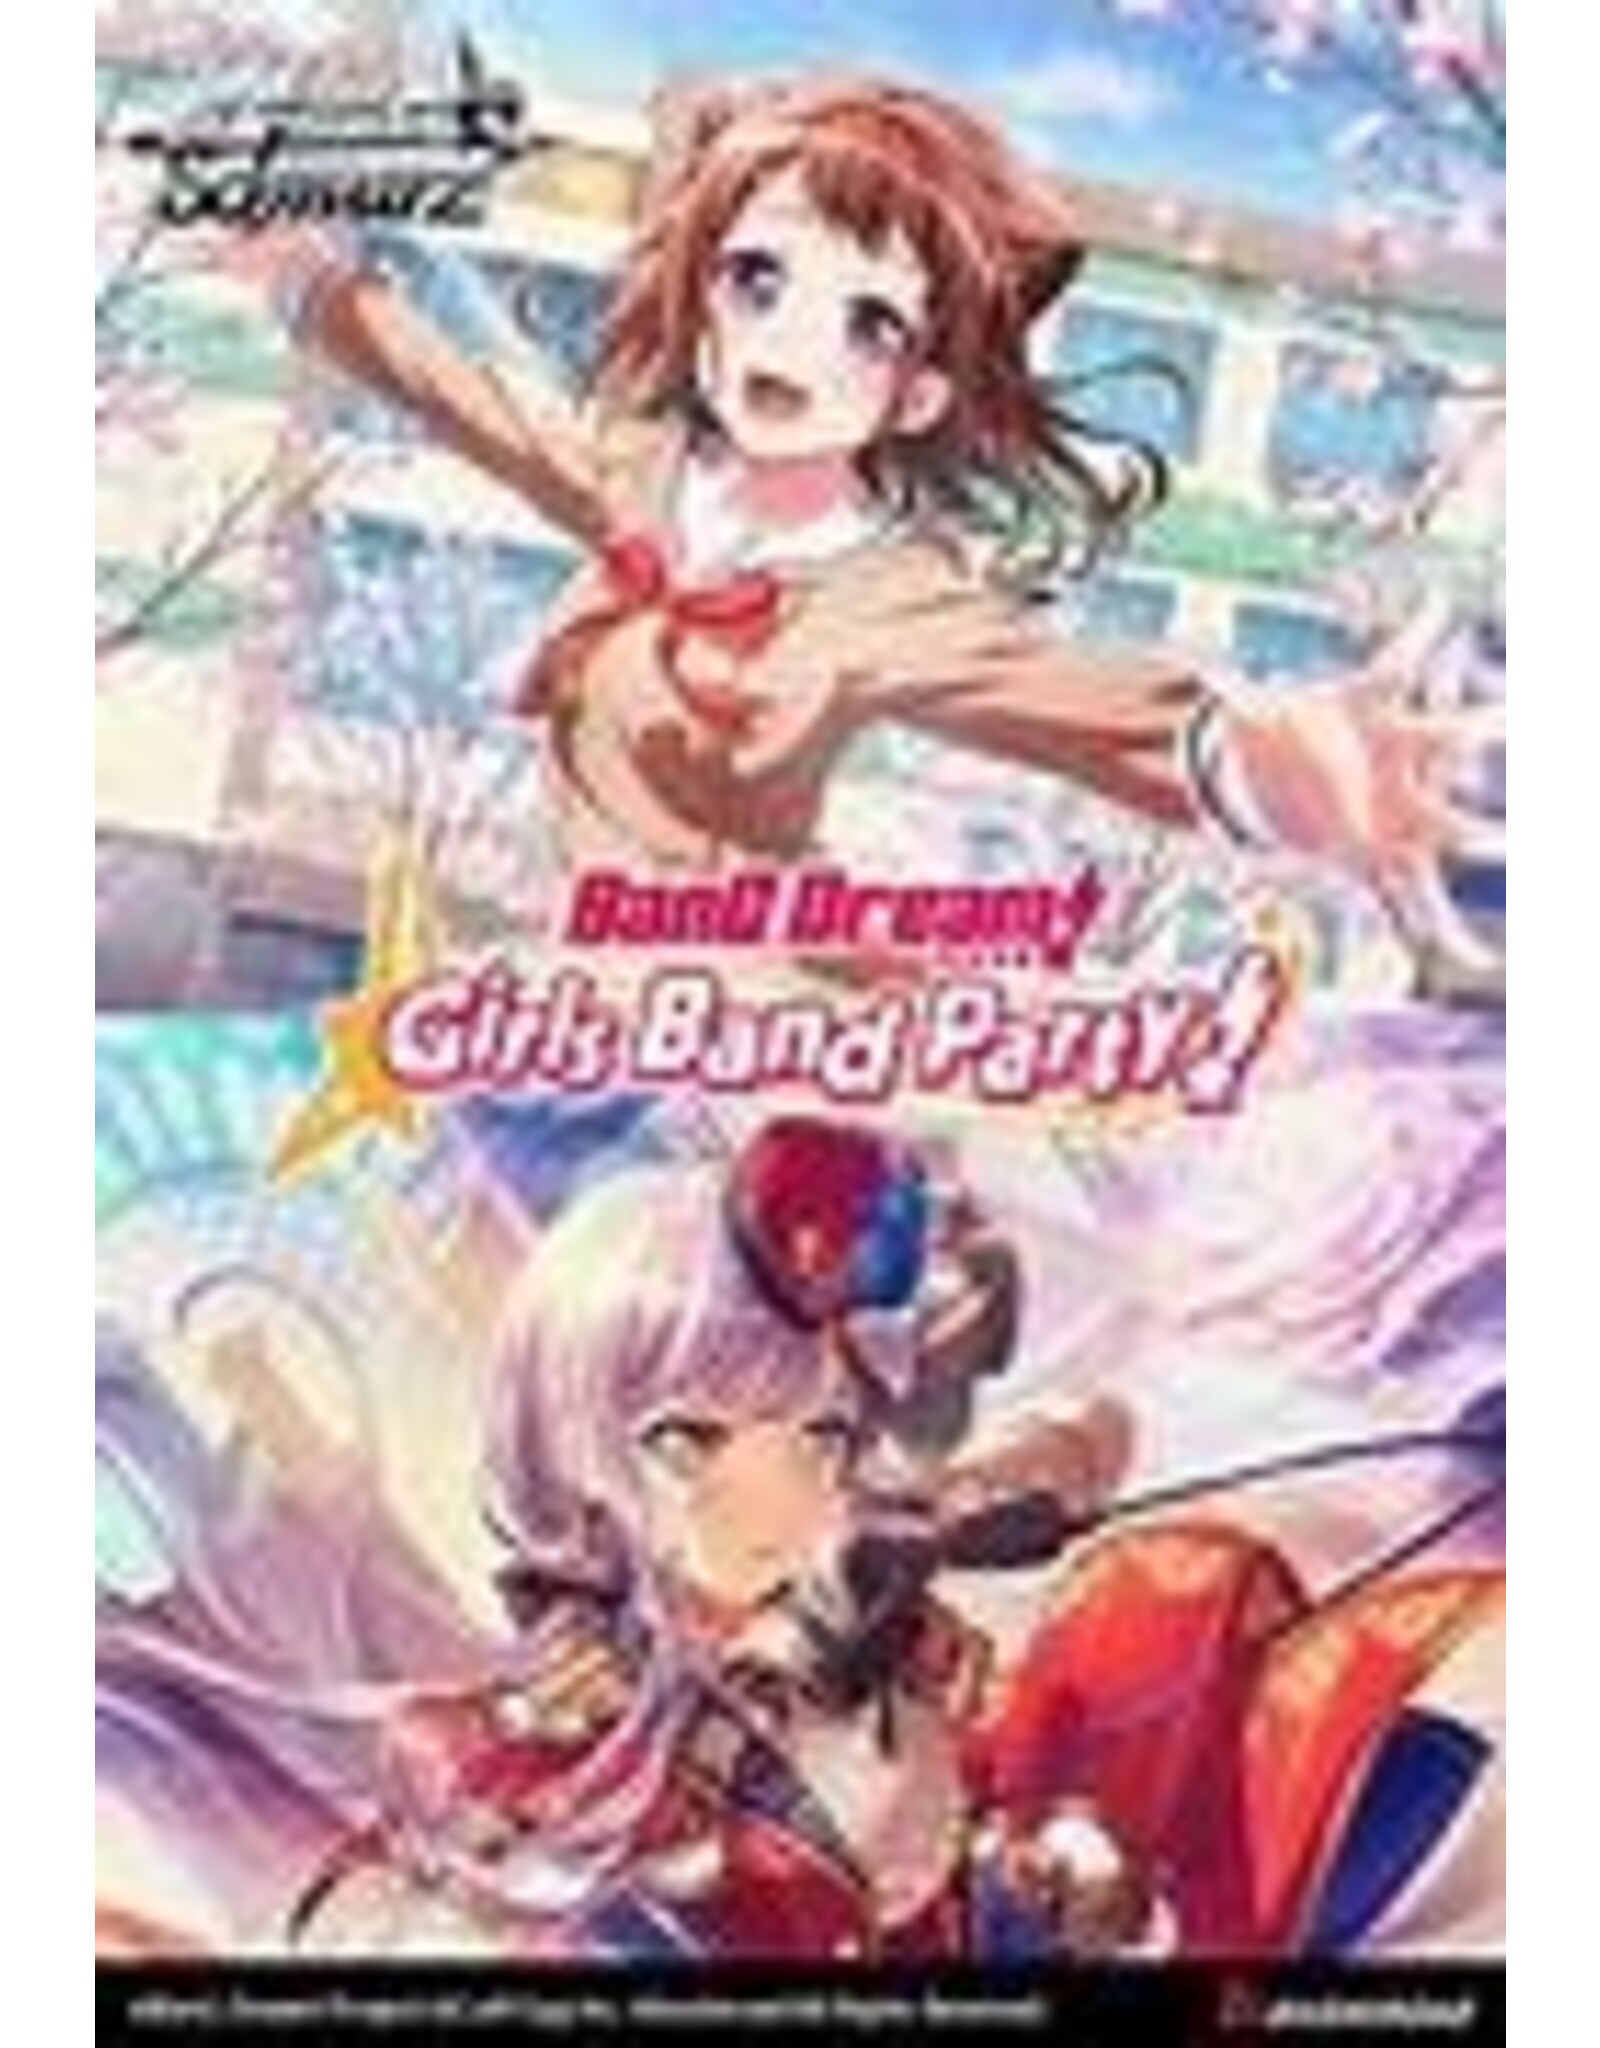 Weiss Schwarz Bang Dream 5th Anniversary English Complete Play Set